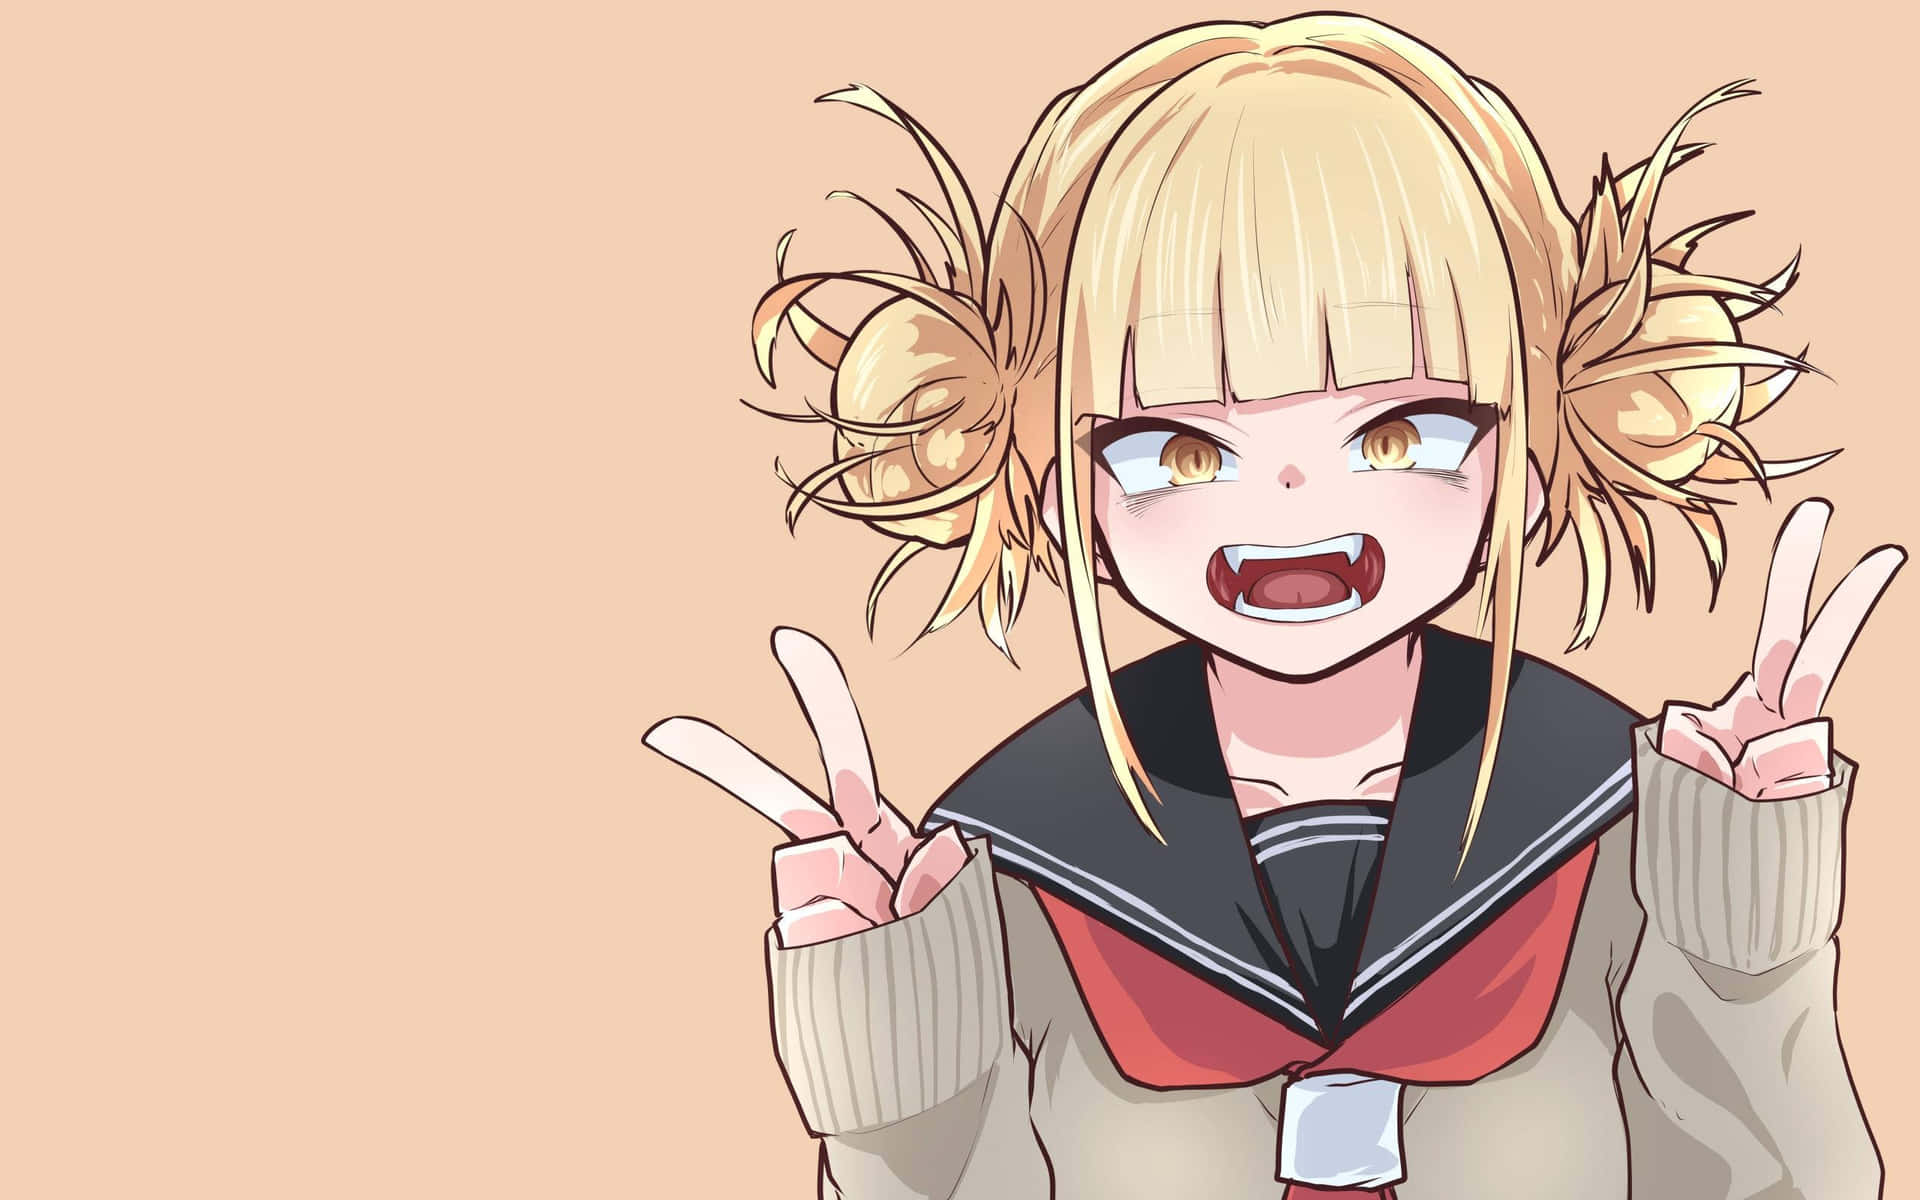 Quirky Himiko Toga Aesthetic Doing A Gesture Wallpaper